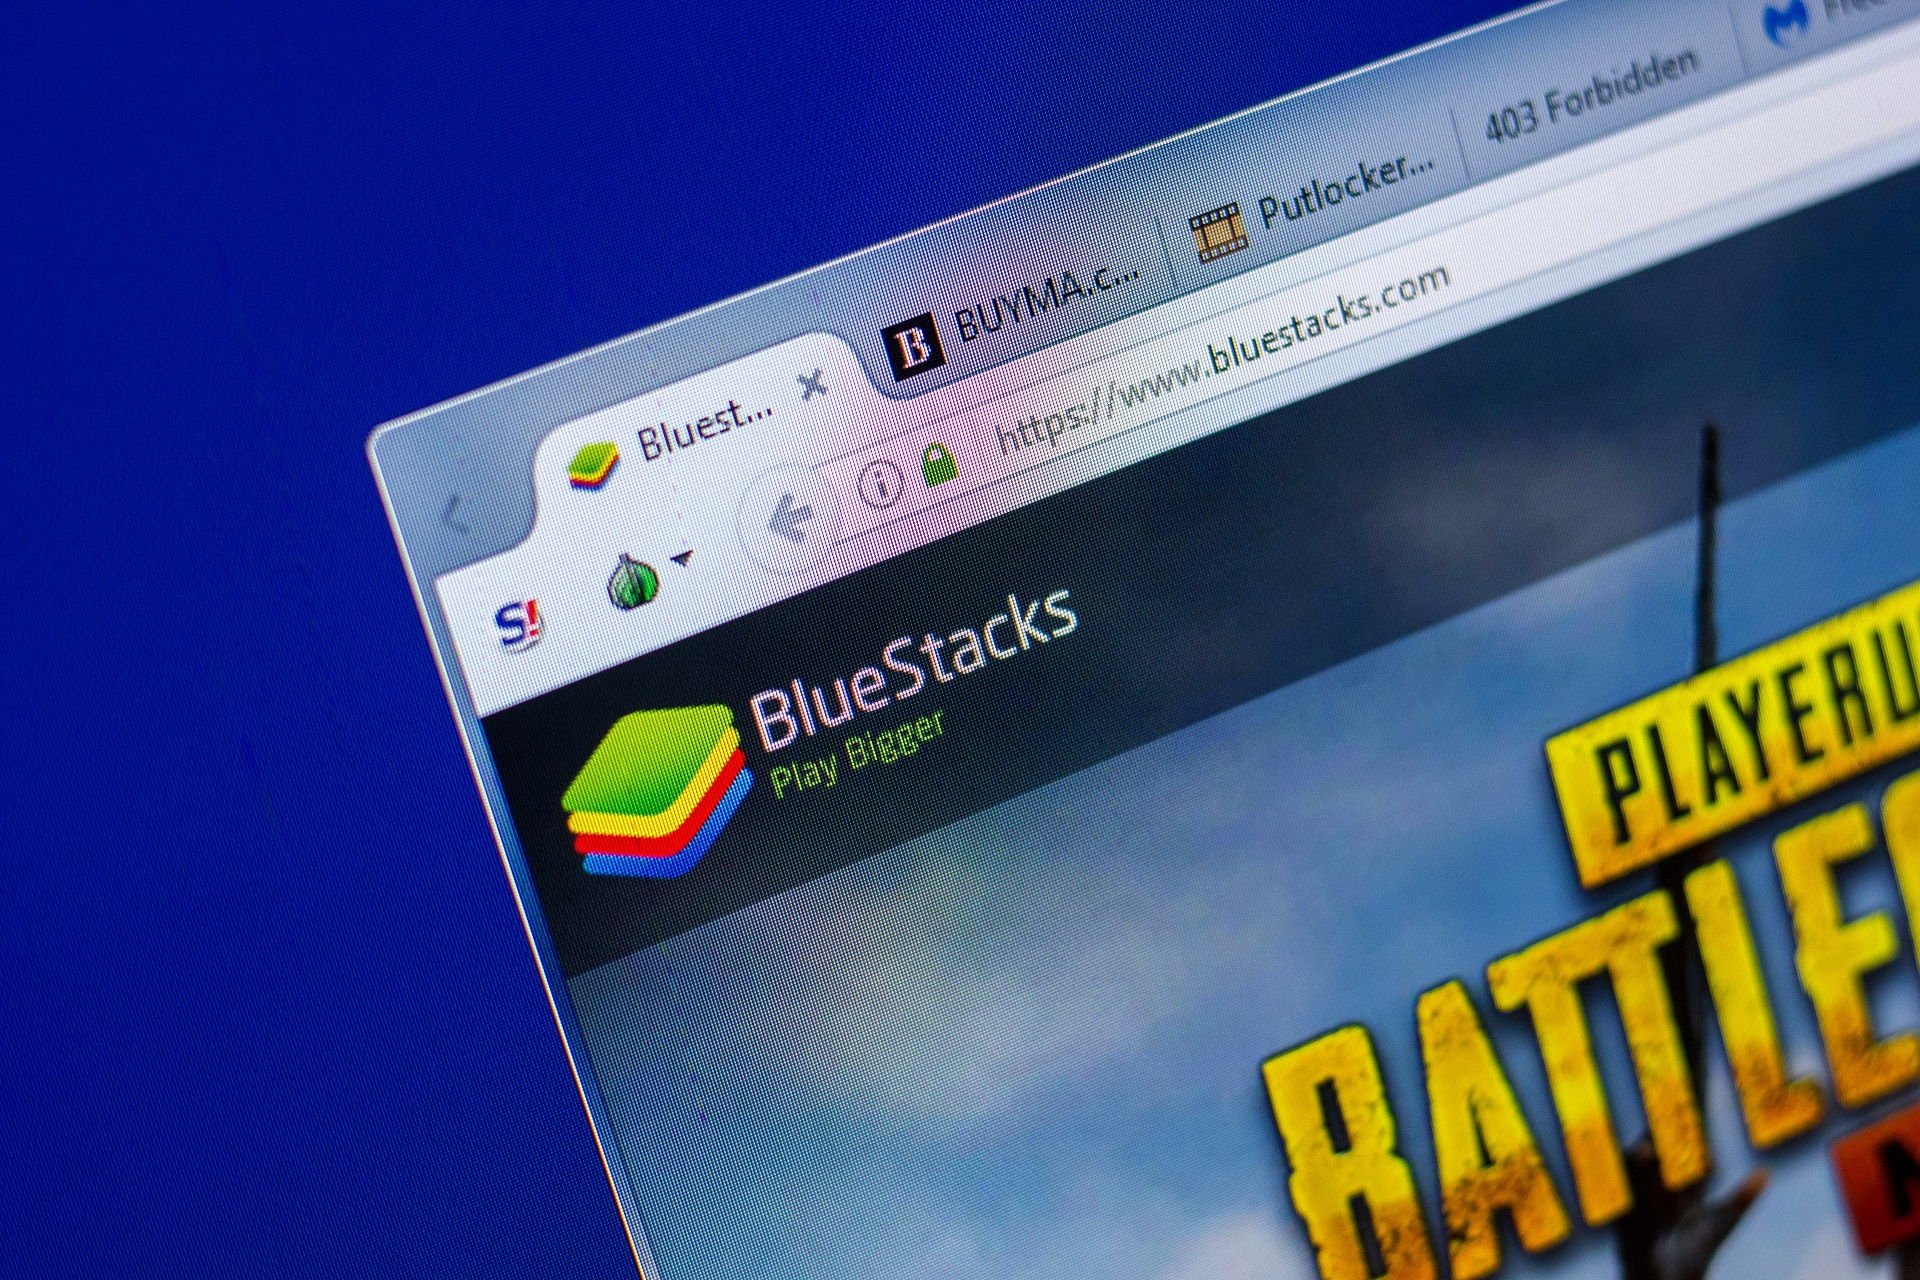 How to fix Bluestacks black screen on your PC